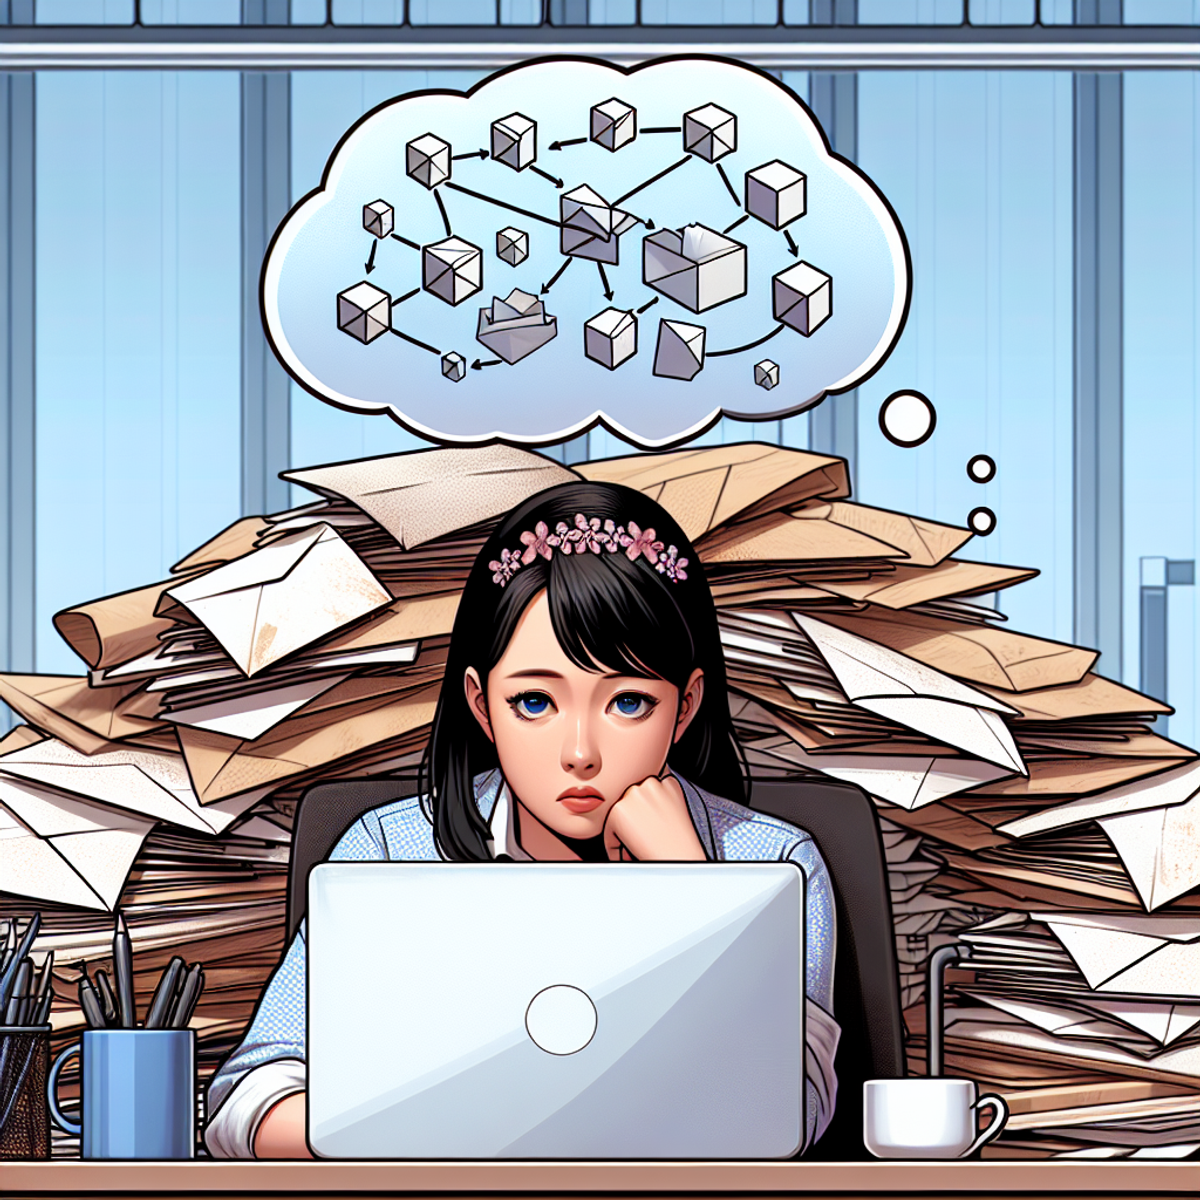 A woman sitting at a desk covered in letters and envelopes, looking stressed but determined. Above her head, a thought bubble shows connected cubes with arrows, representing an AI algorithm processing responses.